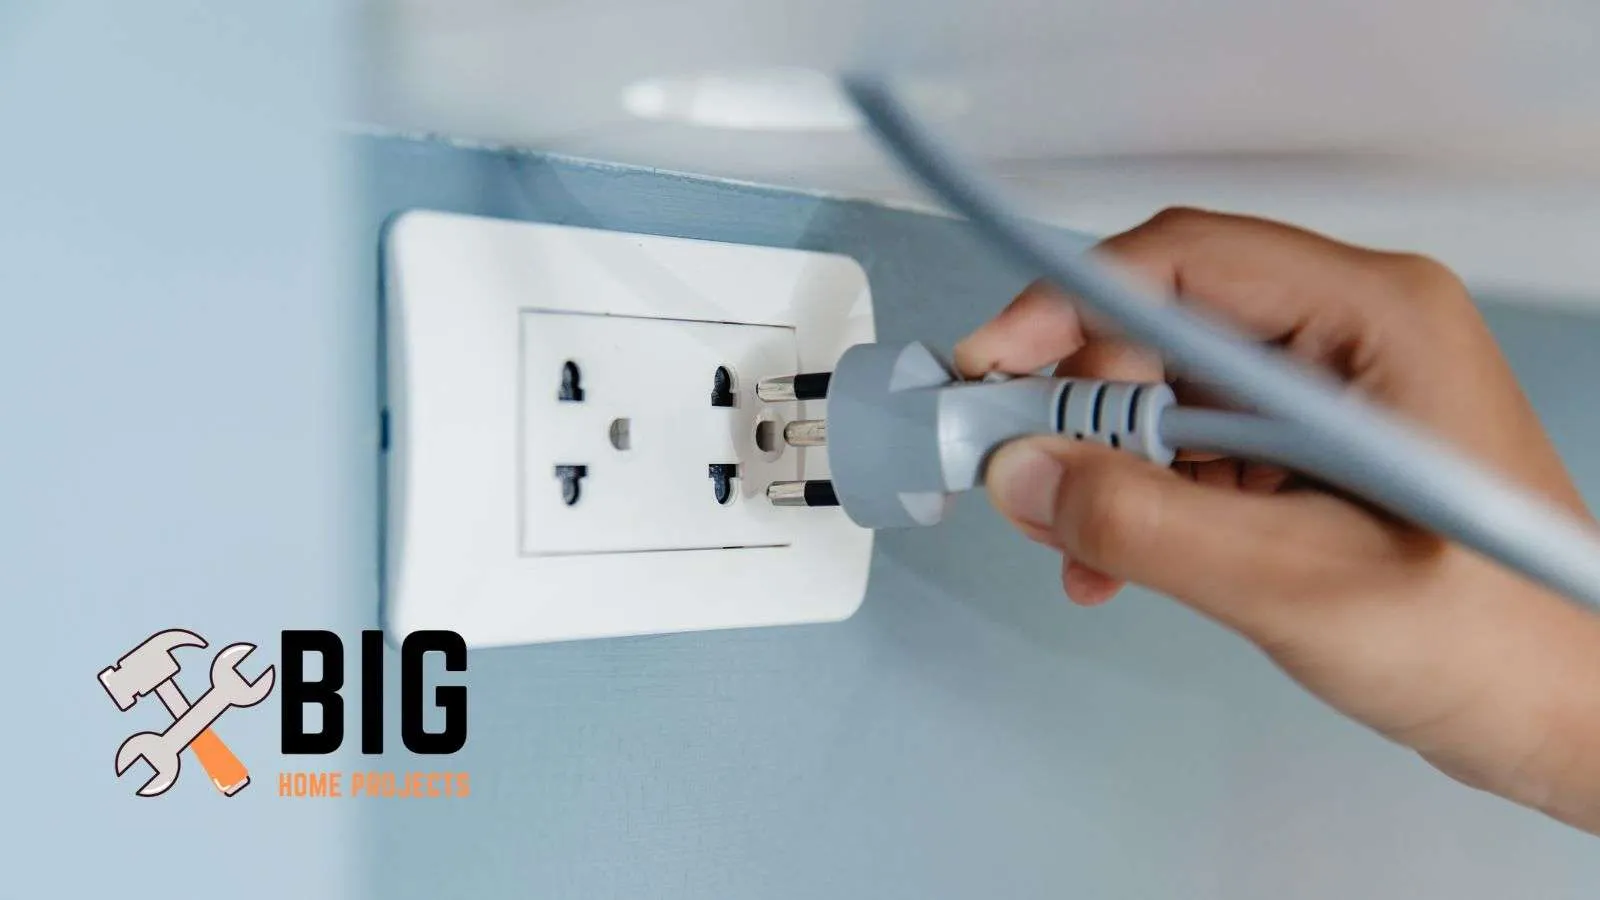 Electrical grounding - bighomeprojects.com